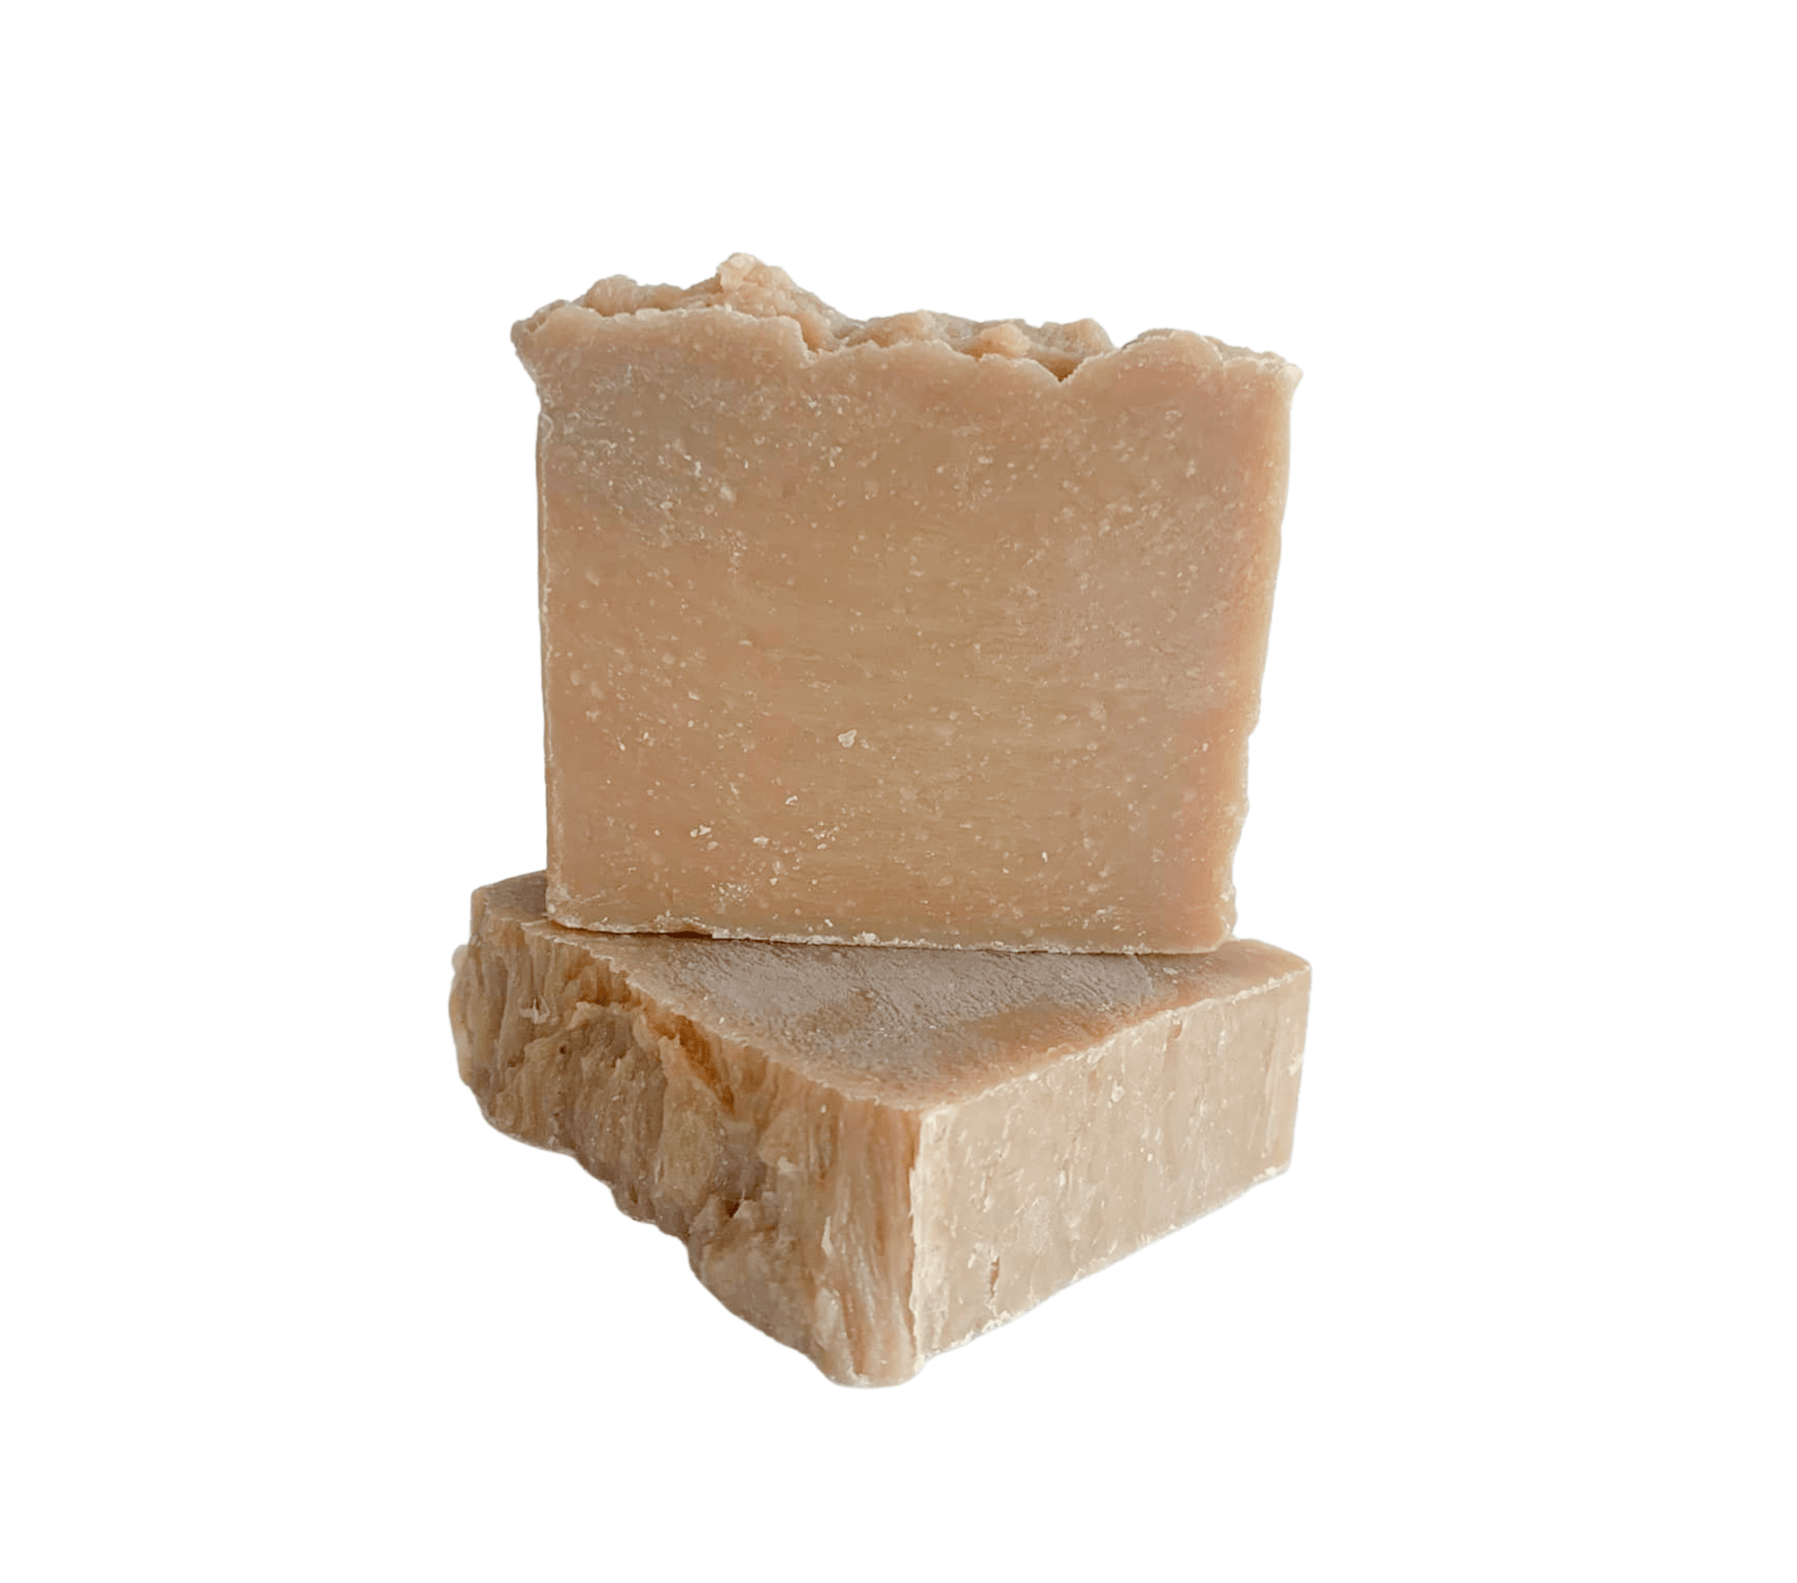 This Oat milk Soap  Vegan specialty bar is made with love by Sudzy Bums! Shop more unique gift ideas today with Spots Initiatives, the best way to support creators.